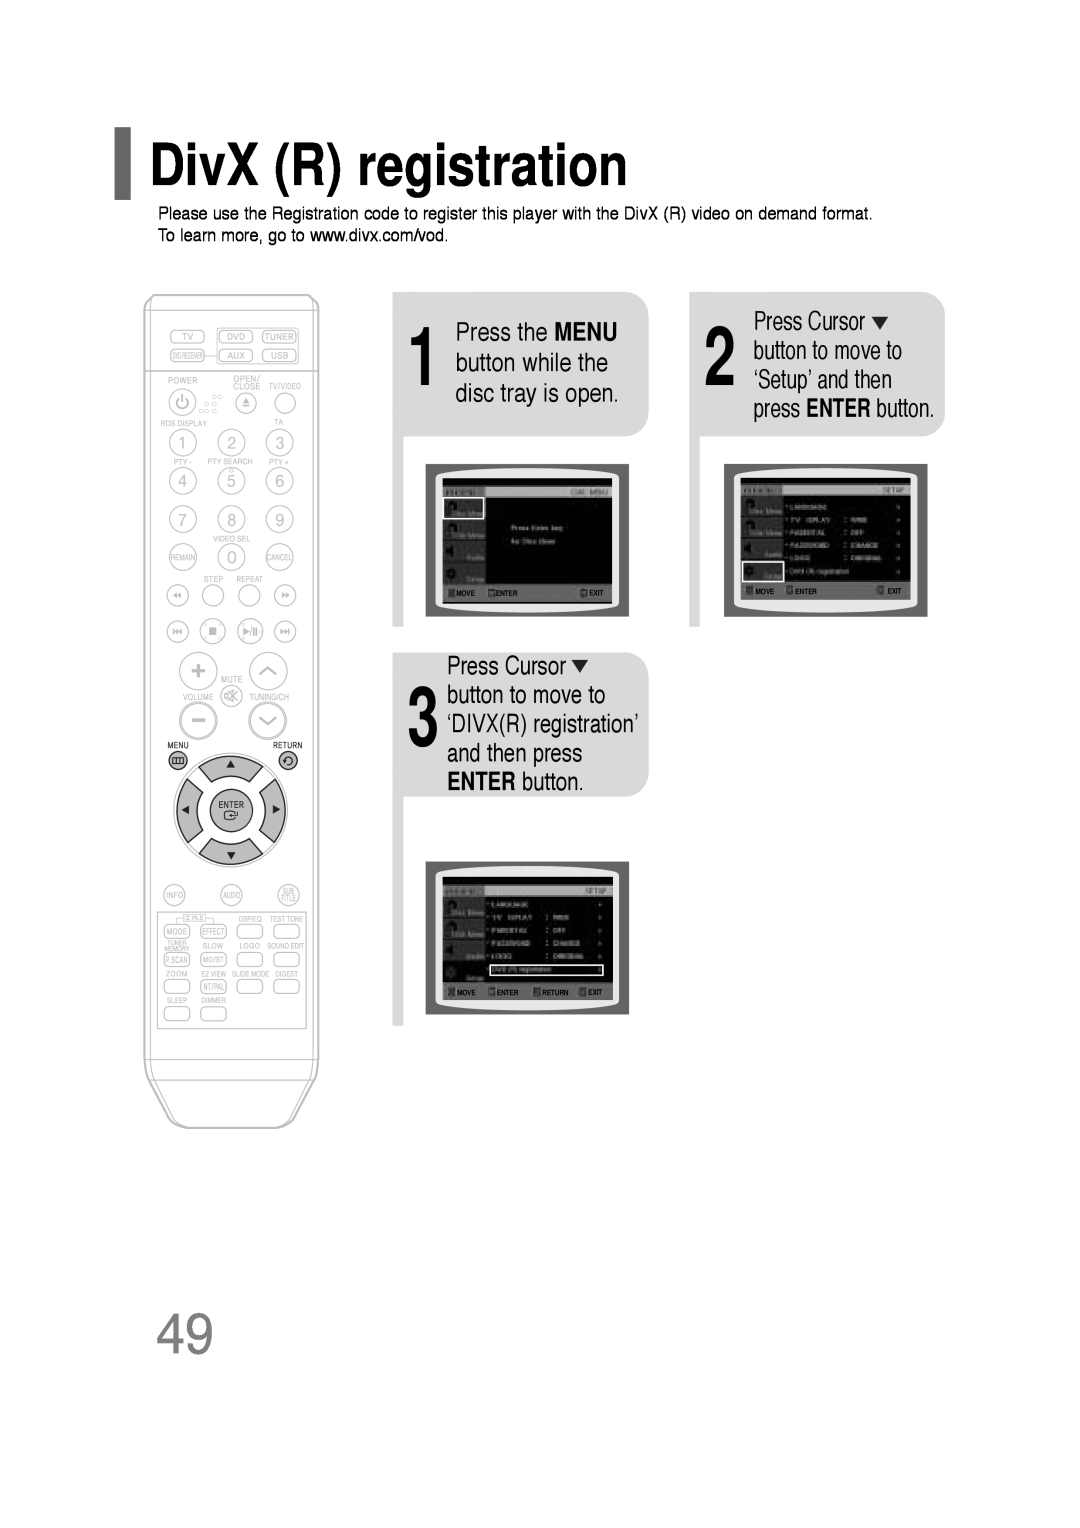 Samsung HT-Q20 DivX R registration, Press the MENU, button while the, disc tray is open, Press Cursor, button to move to 